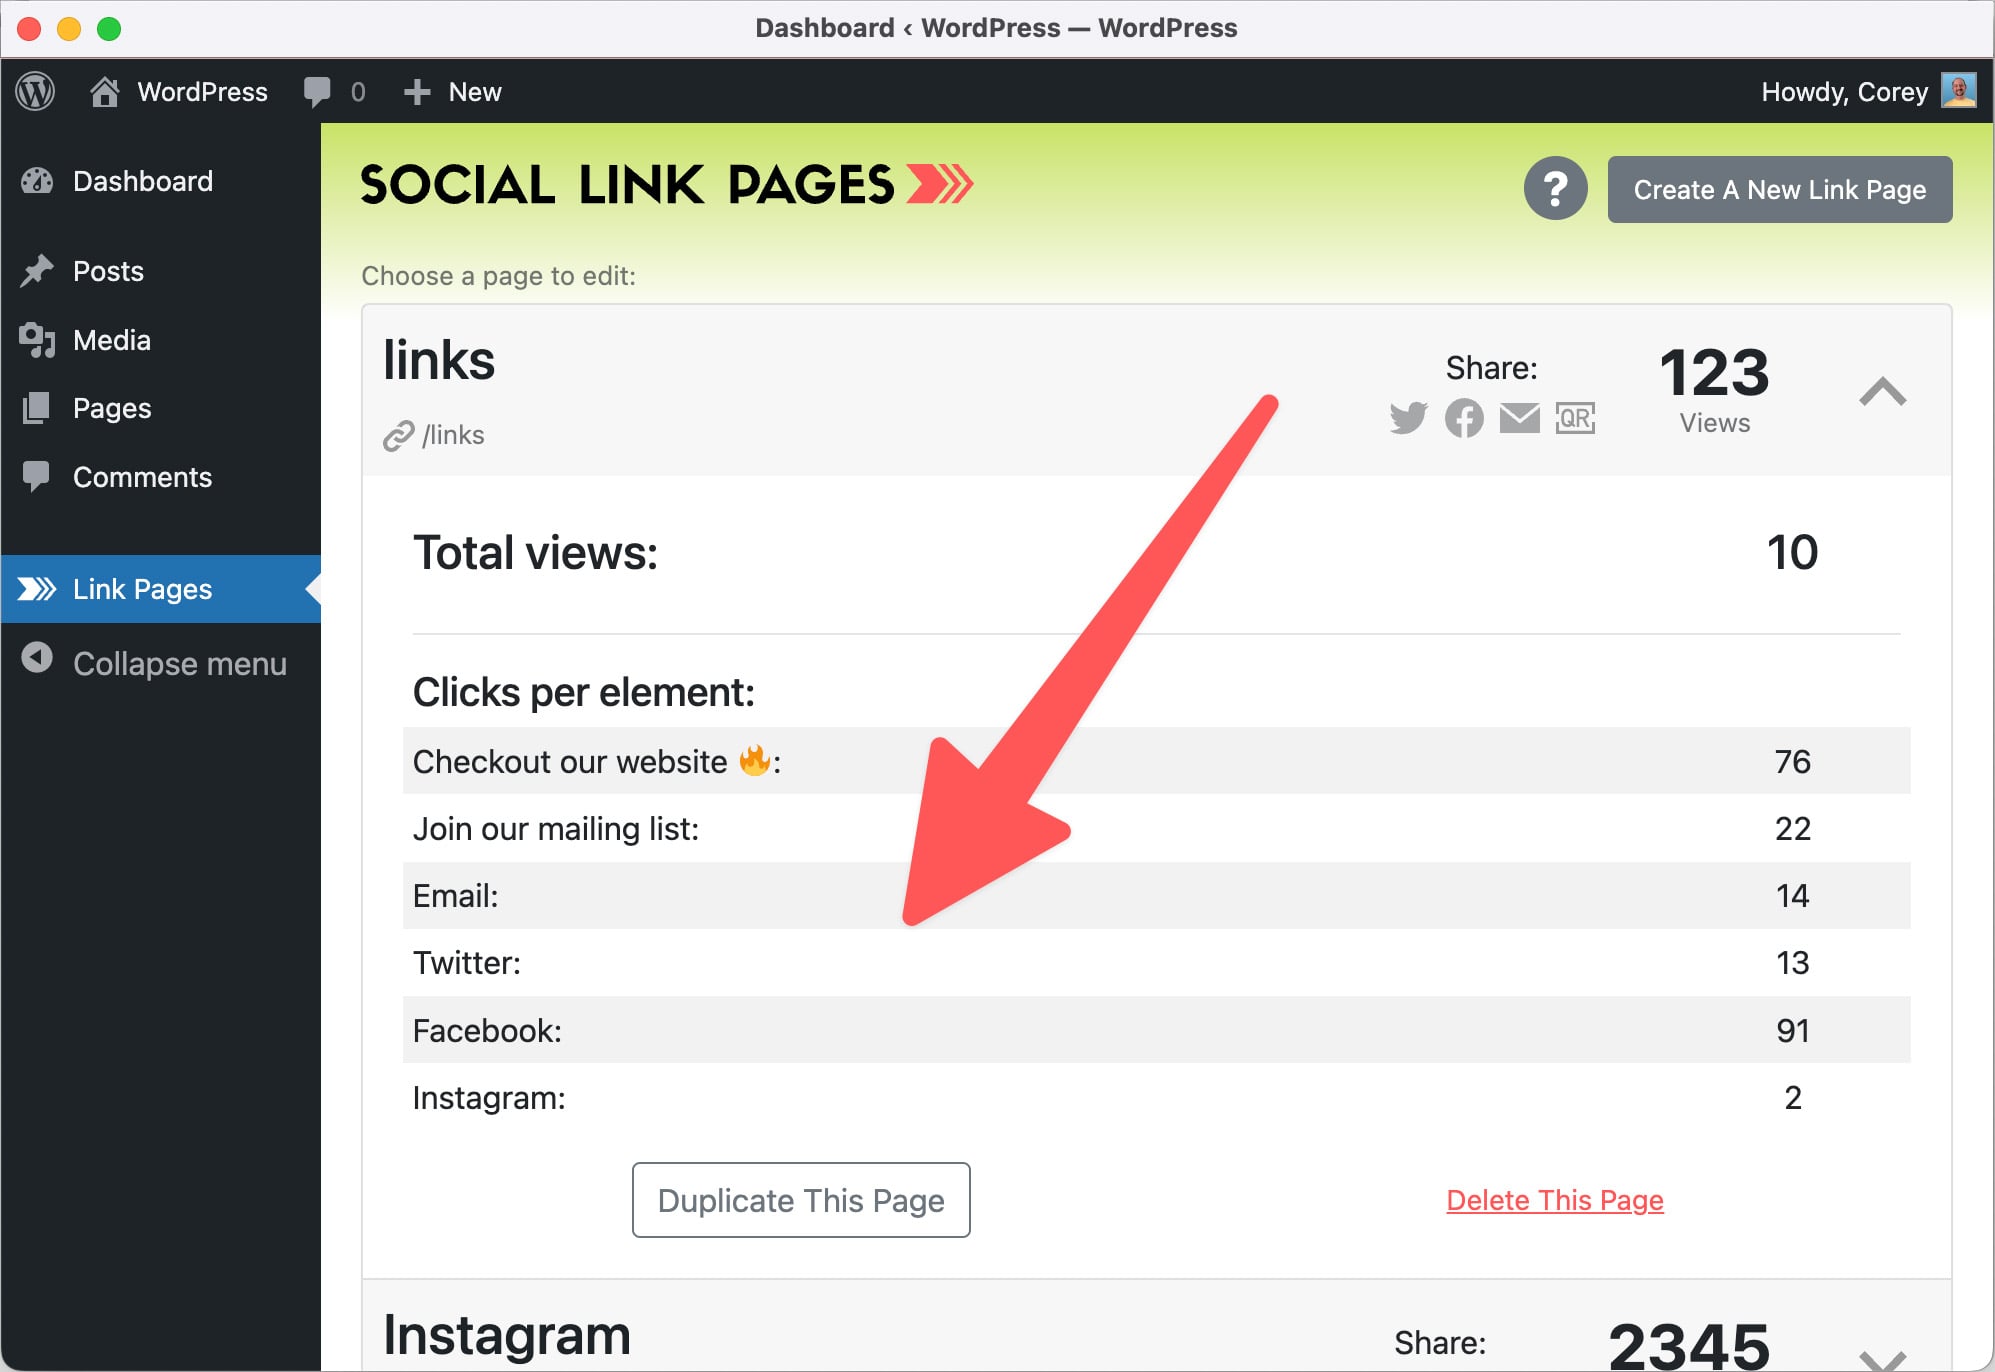 Add links to all of your social profiles for quick access by your customers, followers or fans.